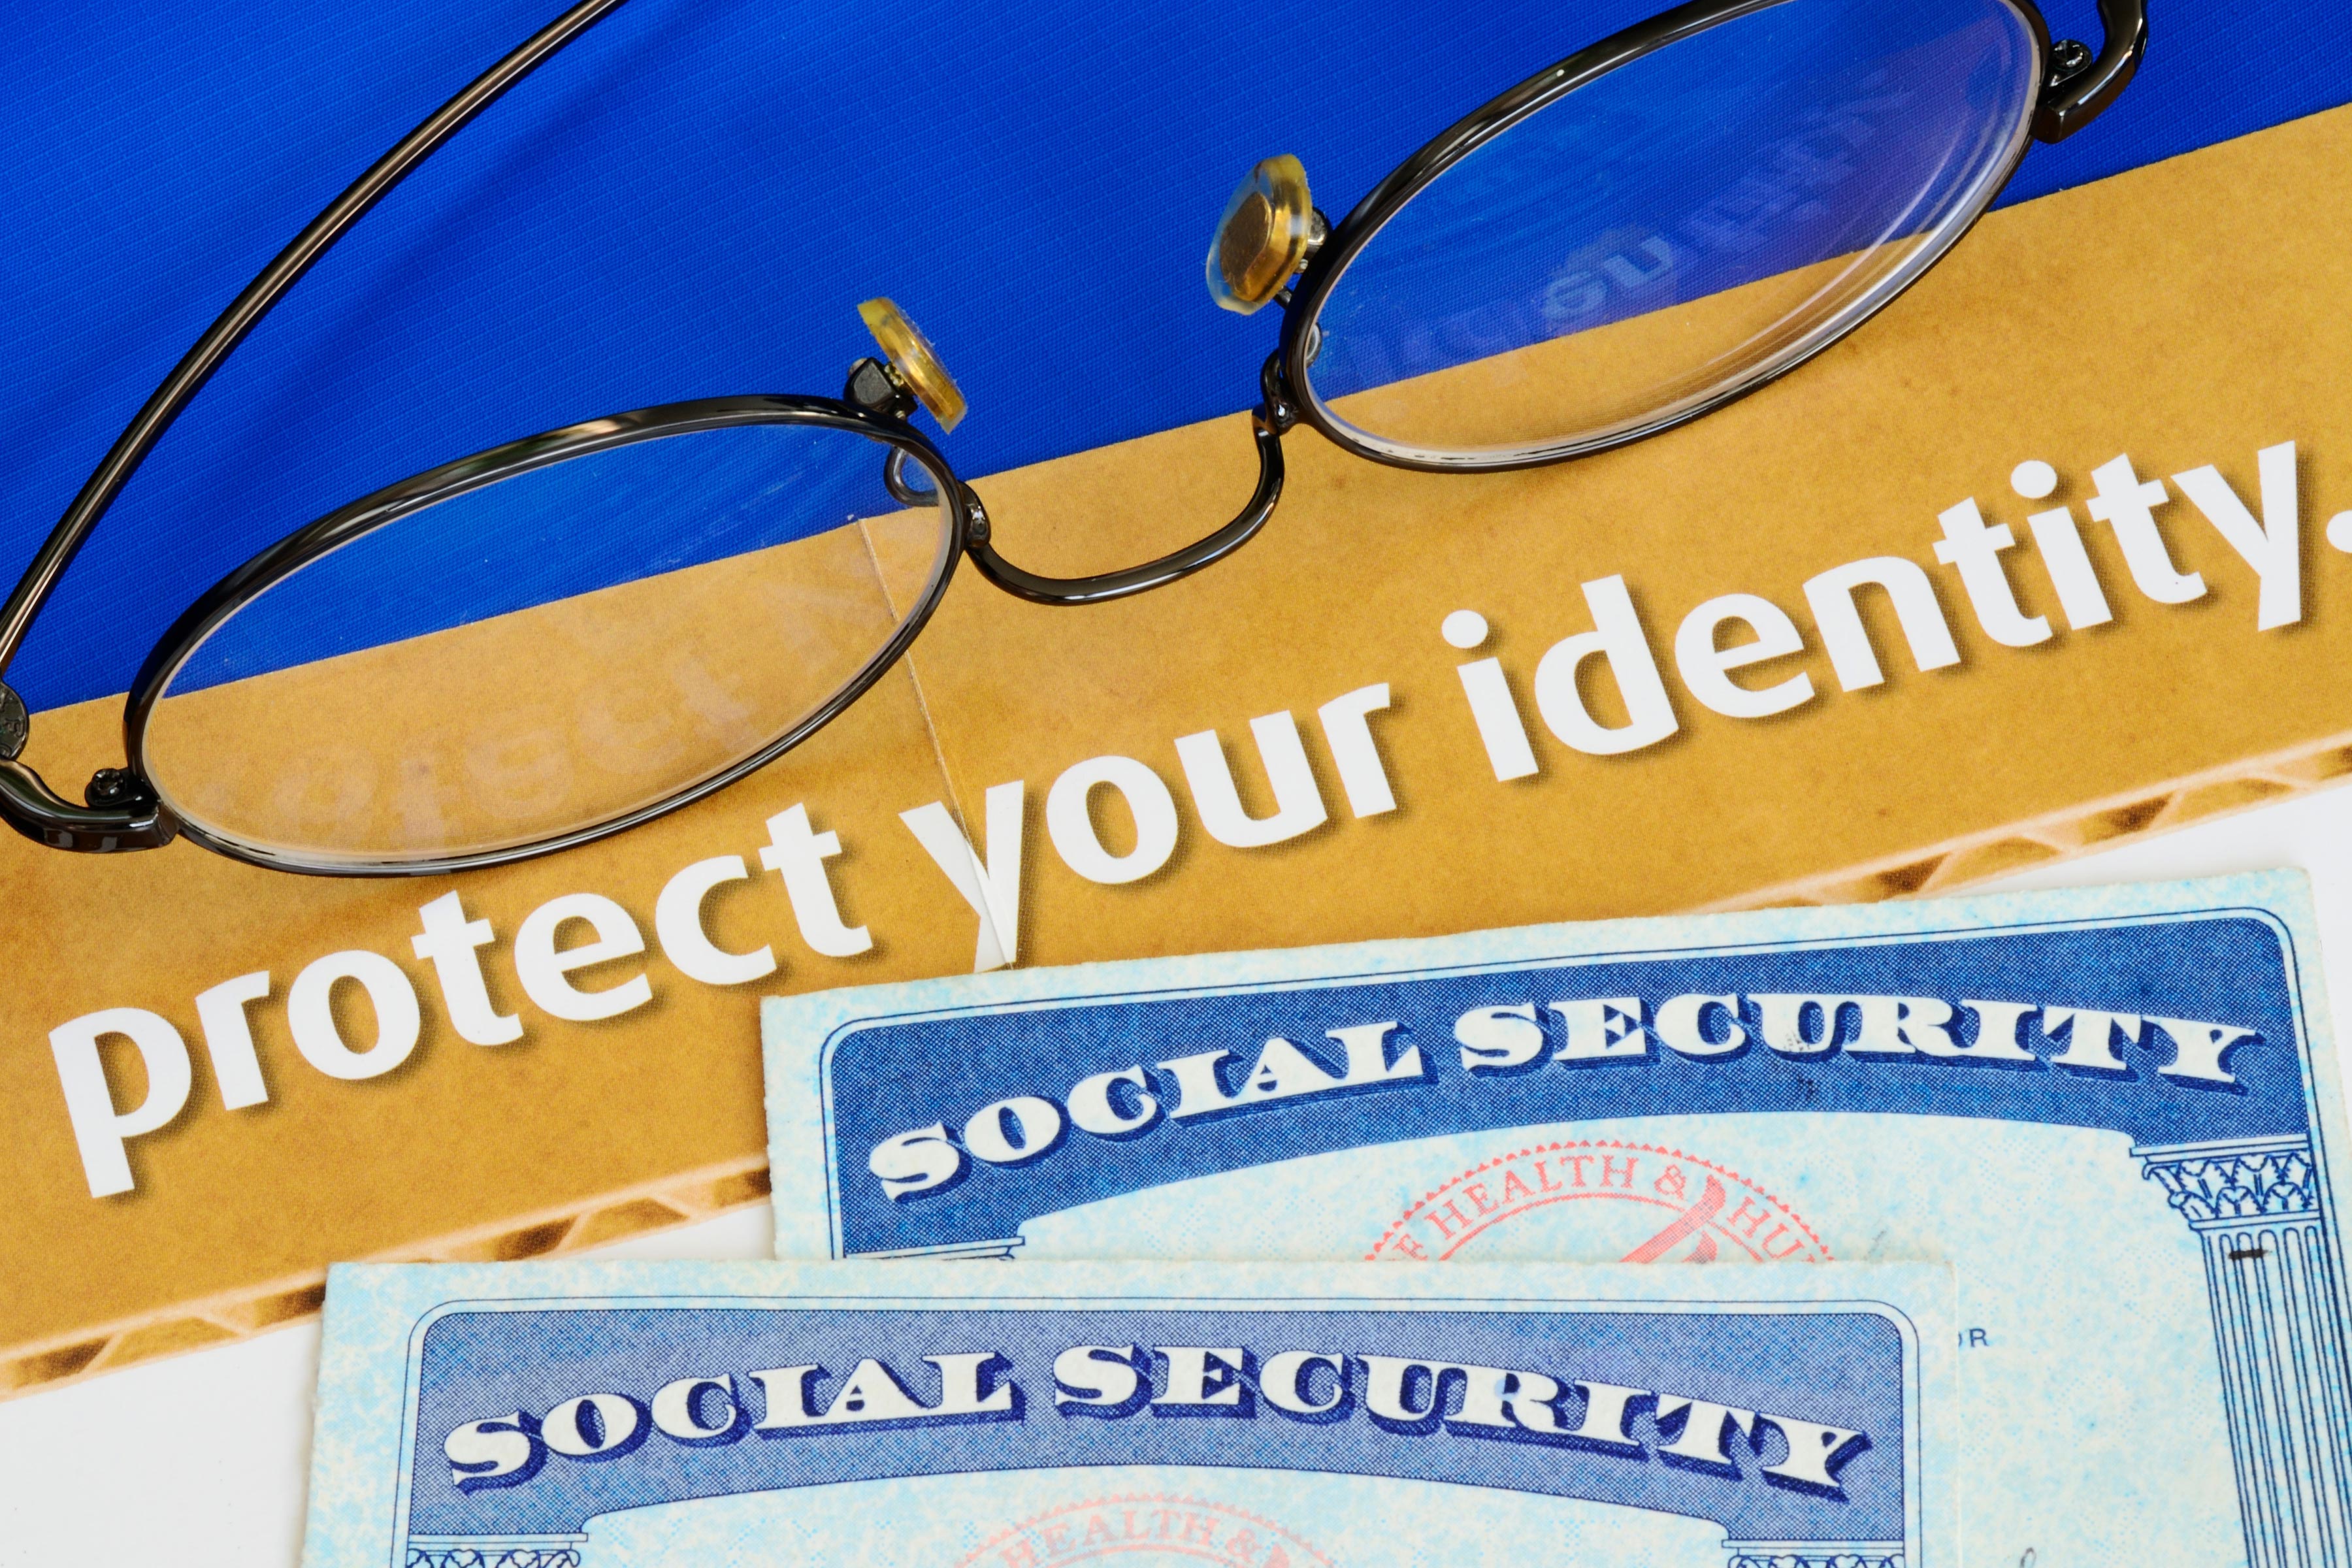 Identity Theft - What Is It, and How Can You Make Sure You Are Protected?